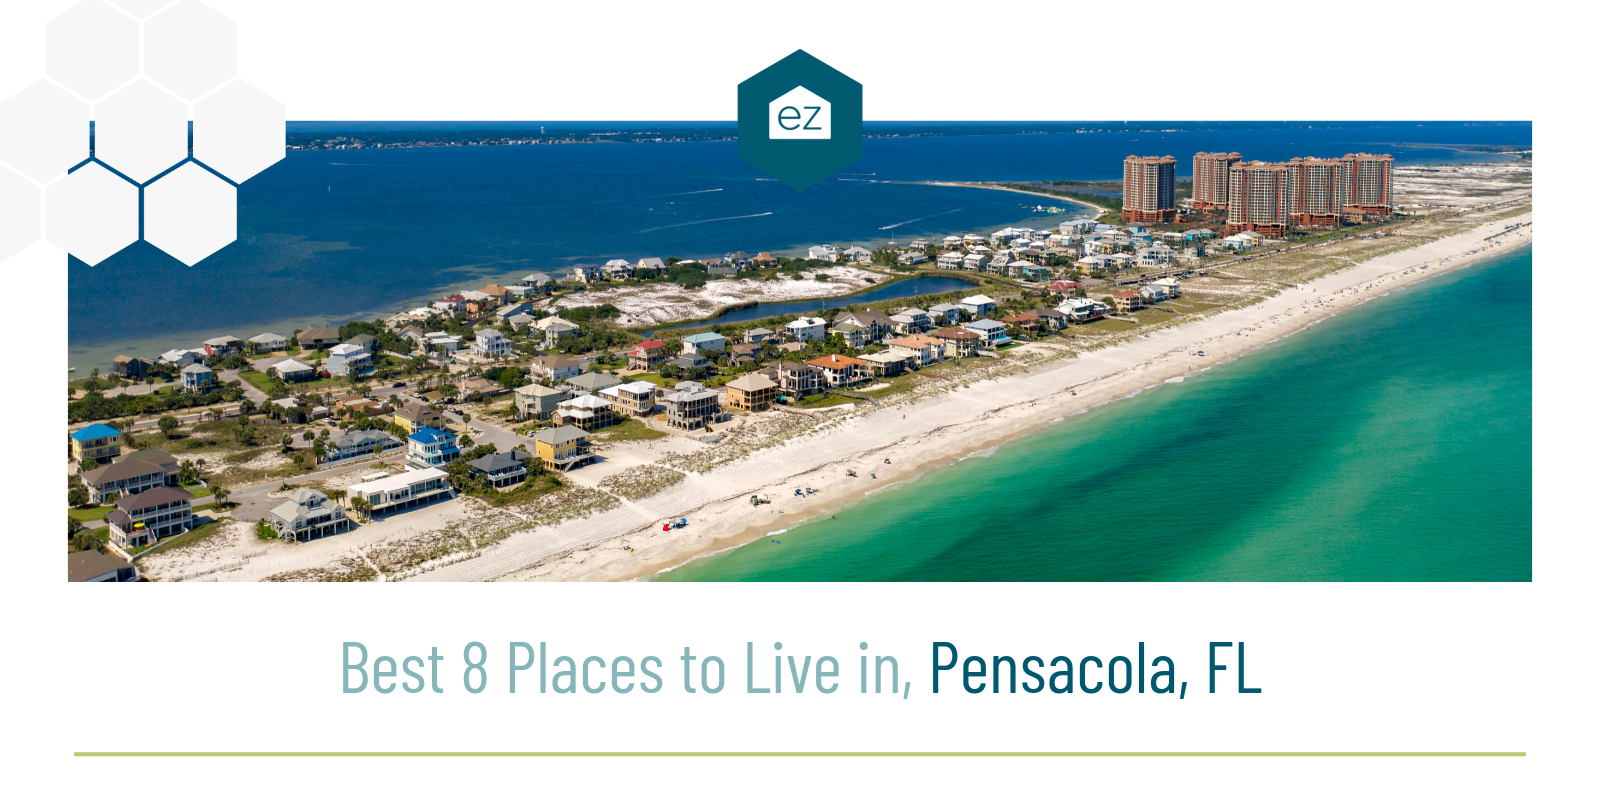 Top 5 what is the best neighborhood to live in pensacola fl 2022